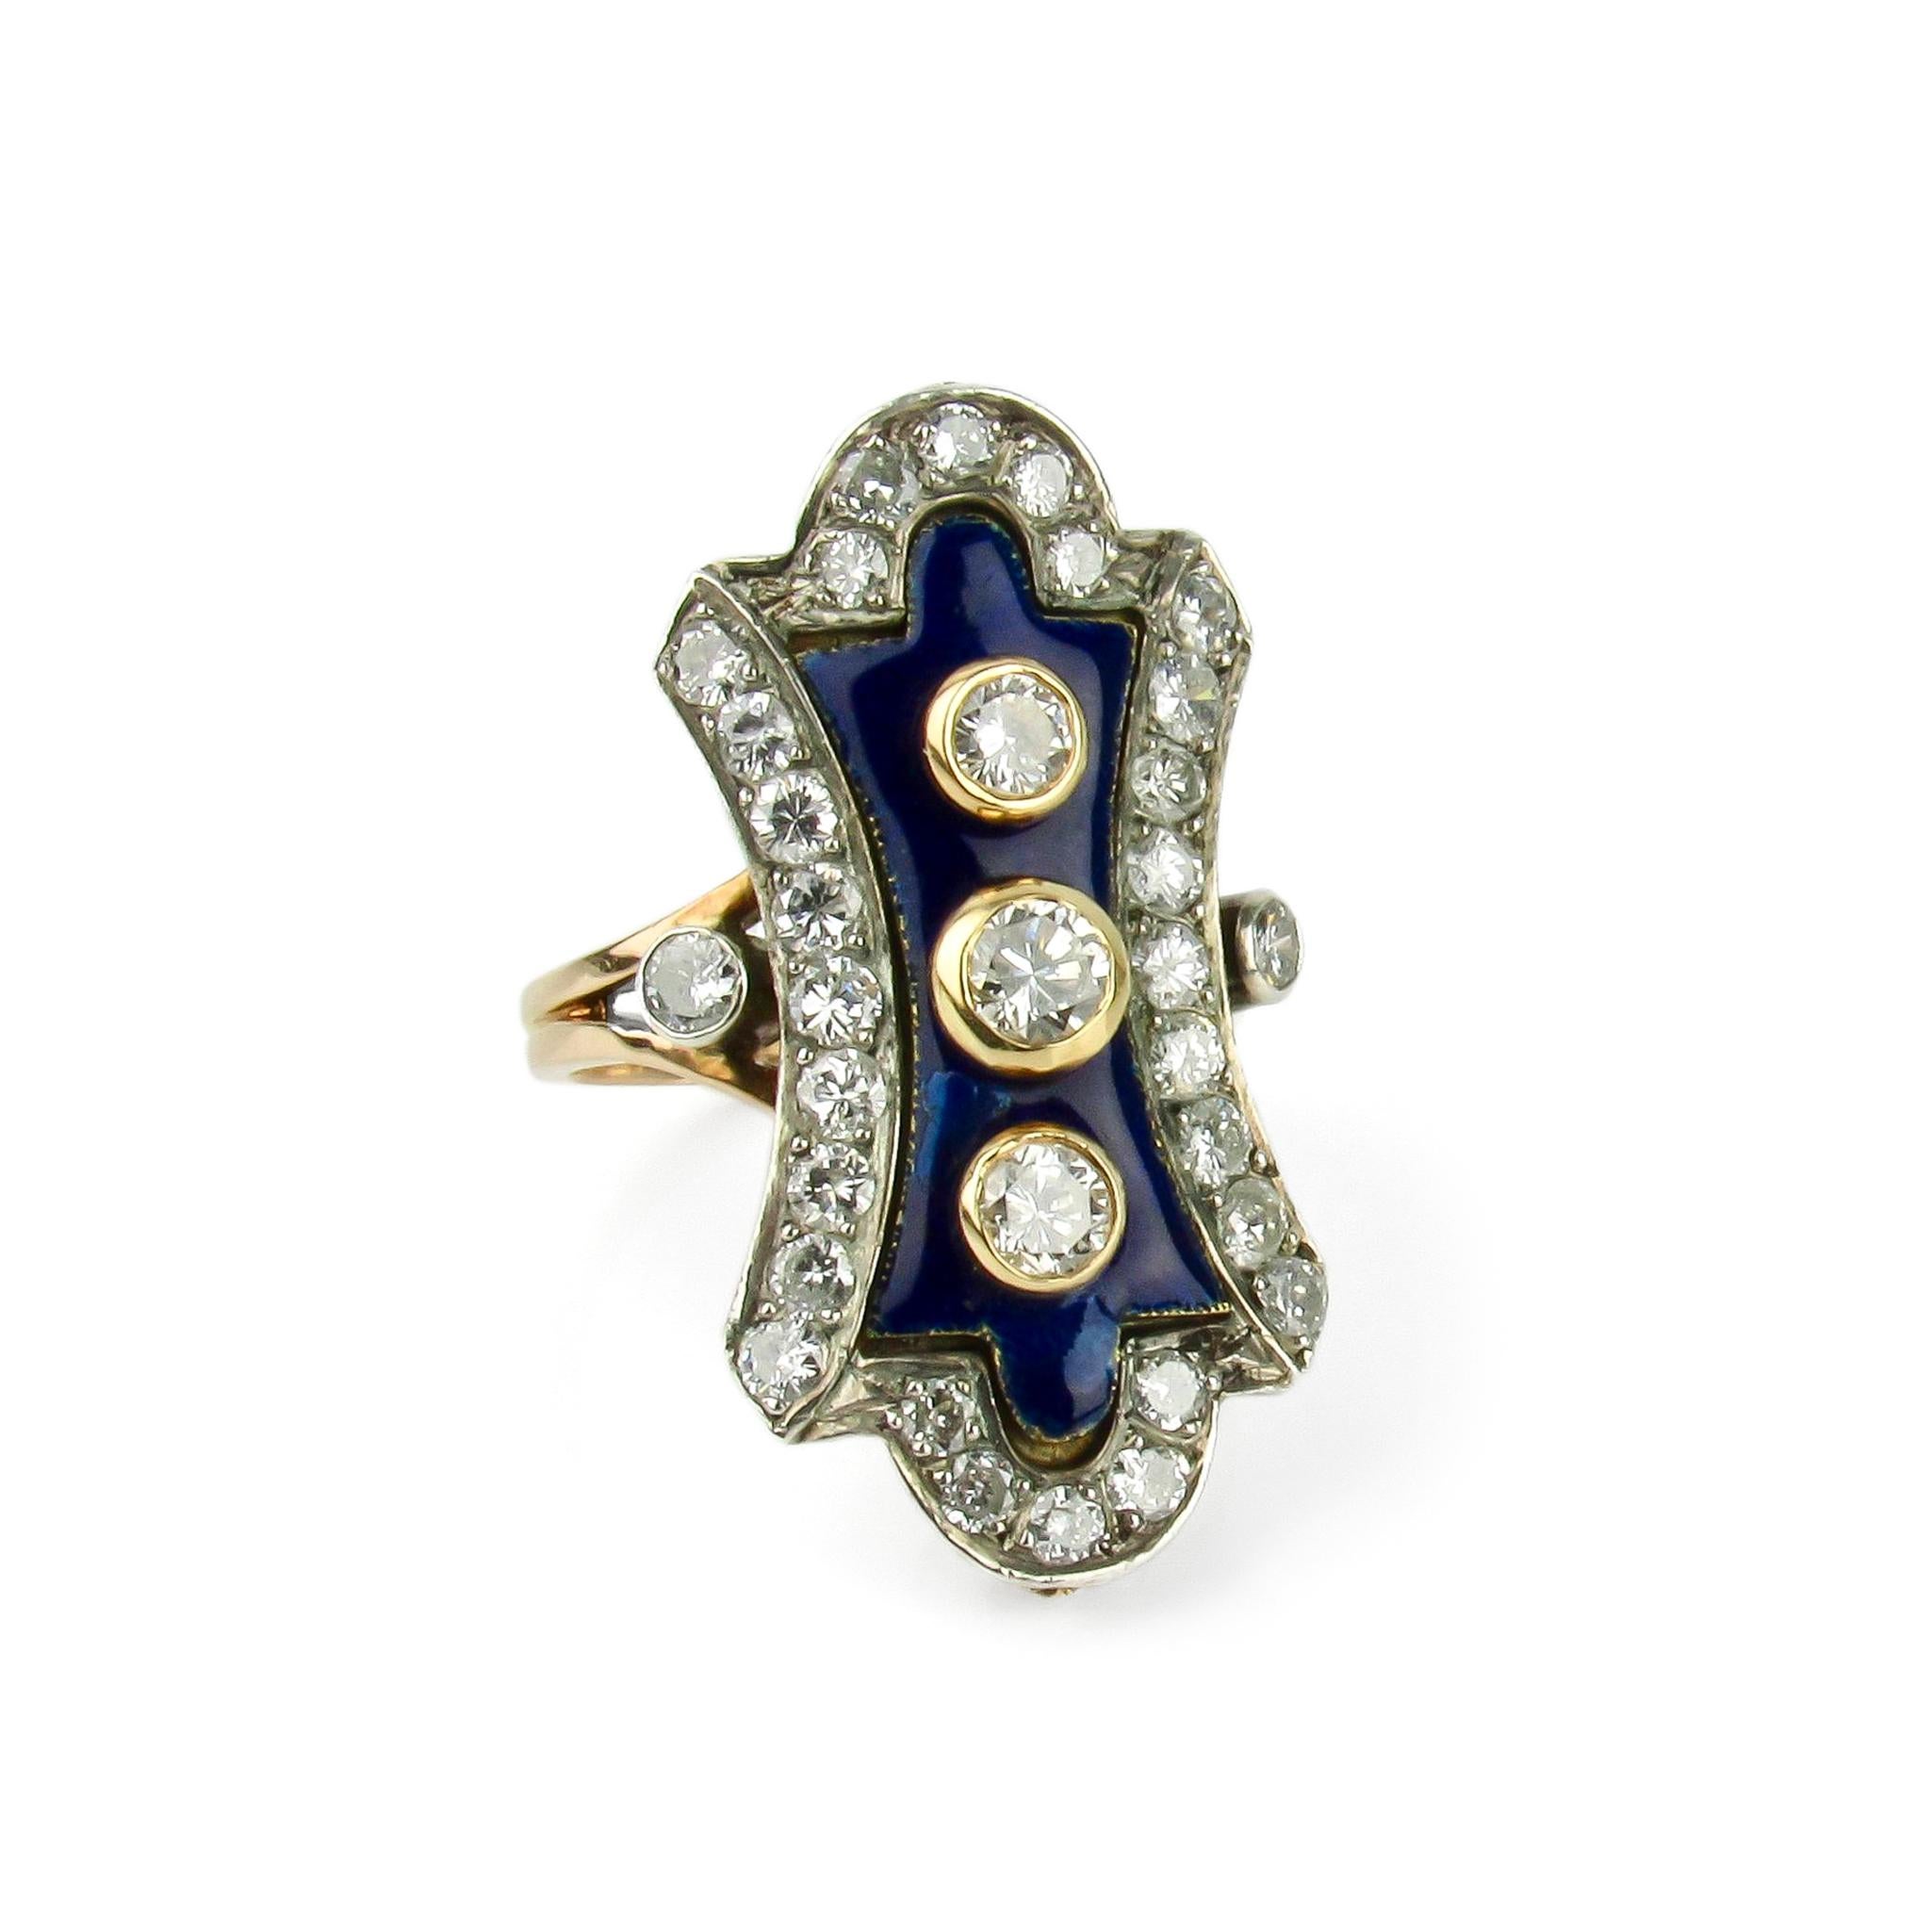 An elegant elongated lobe-shaped ladies ring crafted in silver topped 18 karat gold featuring a center panel of blue enamel with bezel set round brilliant diamonds, surrounded by a border of round brilliant diamonds. 

Measurements: 1 1/4